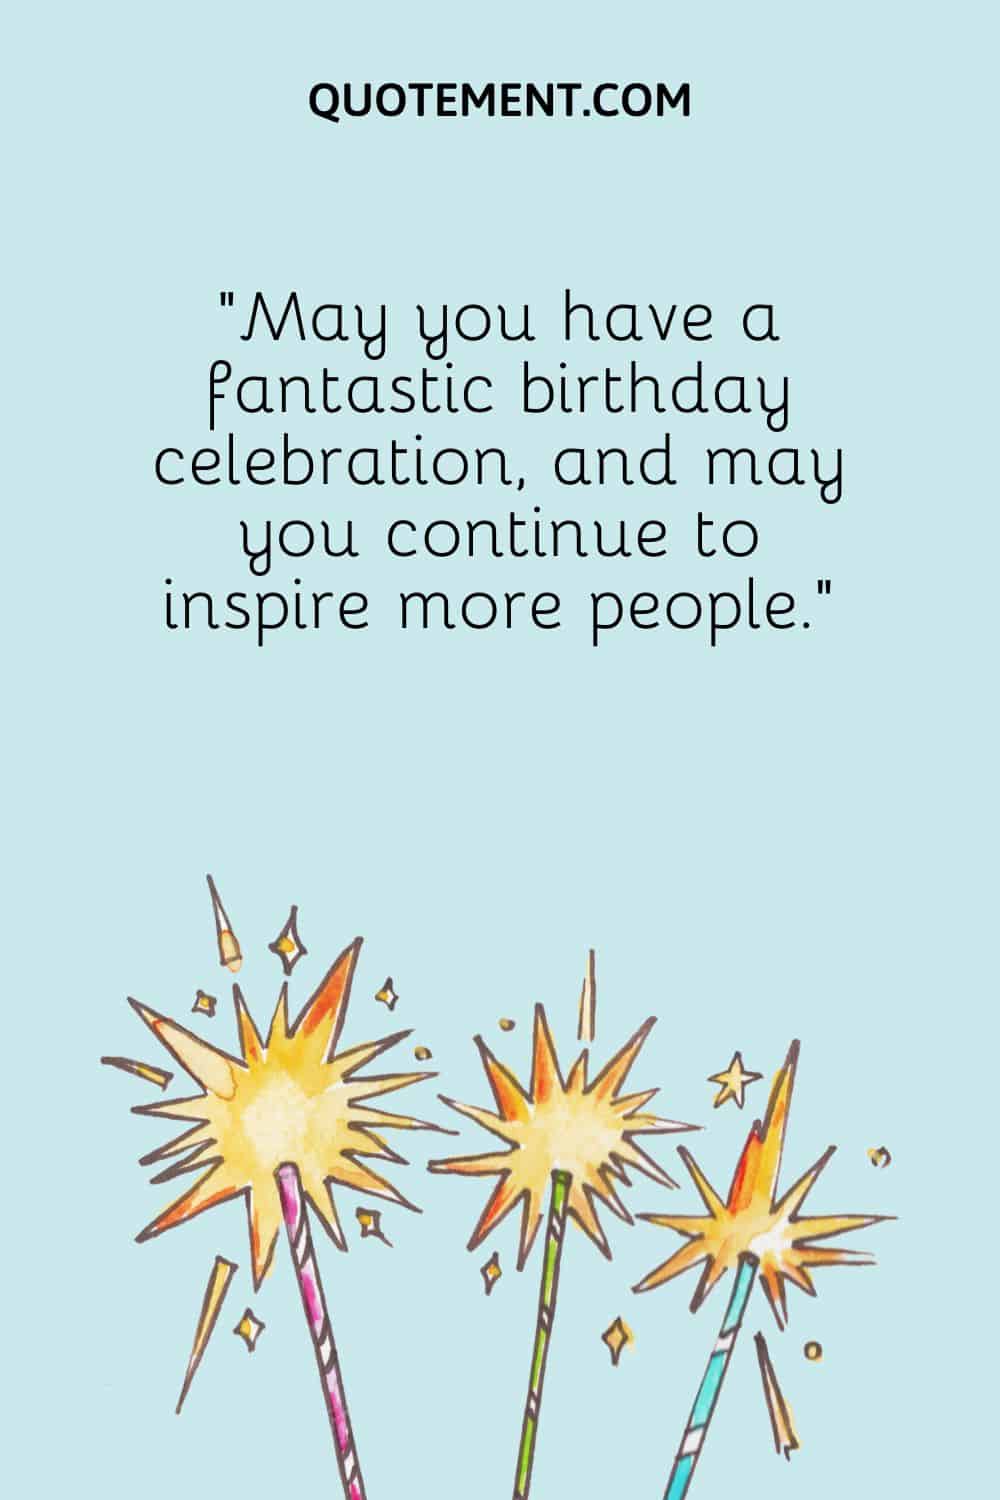 May you have a fantastic birthday celebration, and may you continue to inspire more people